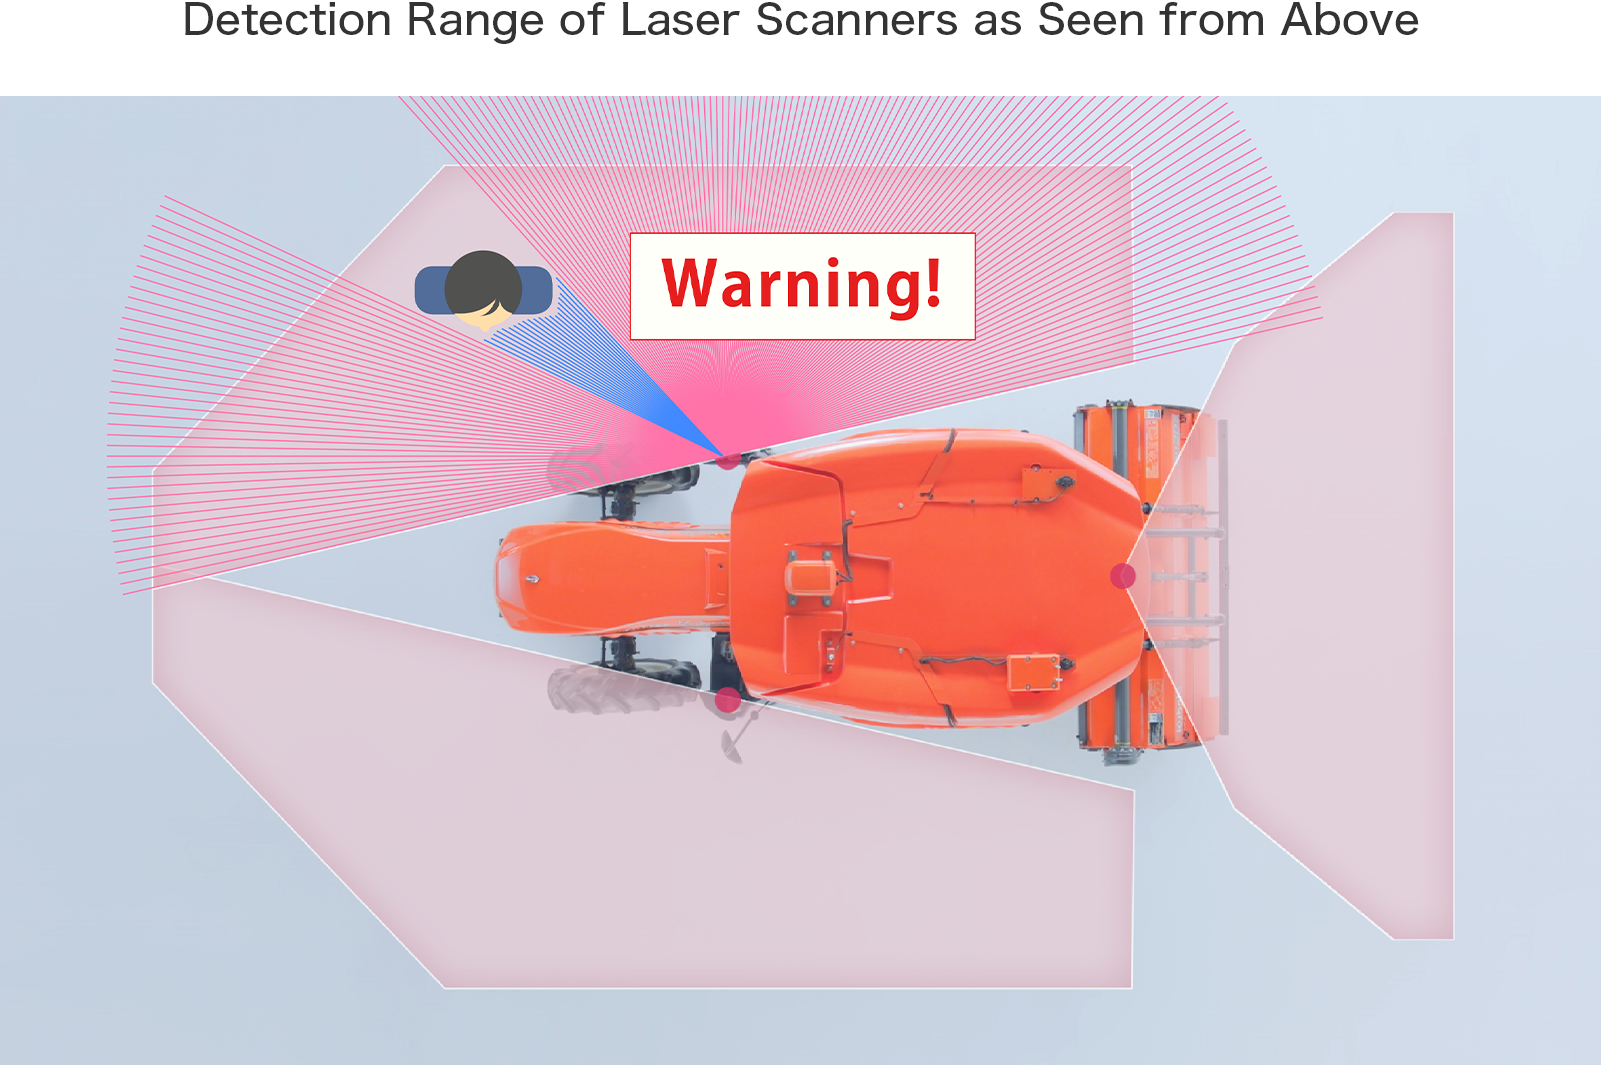 Detection Range of Laser Scanners as Seen from Above